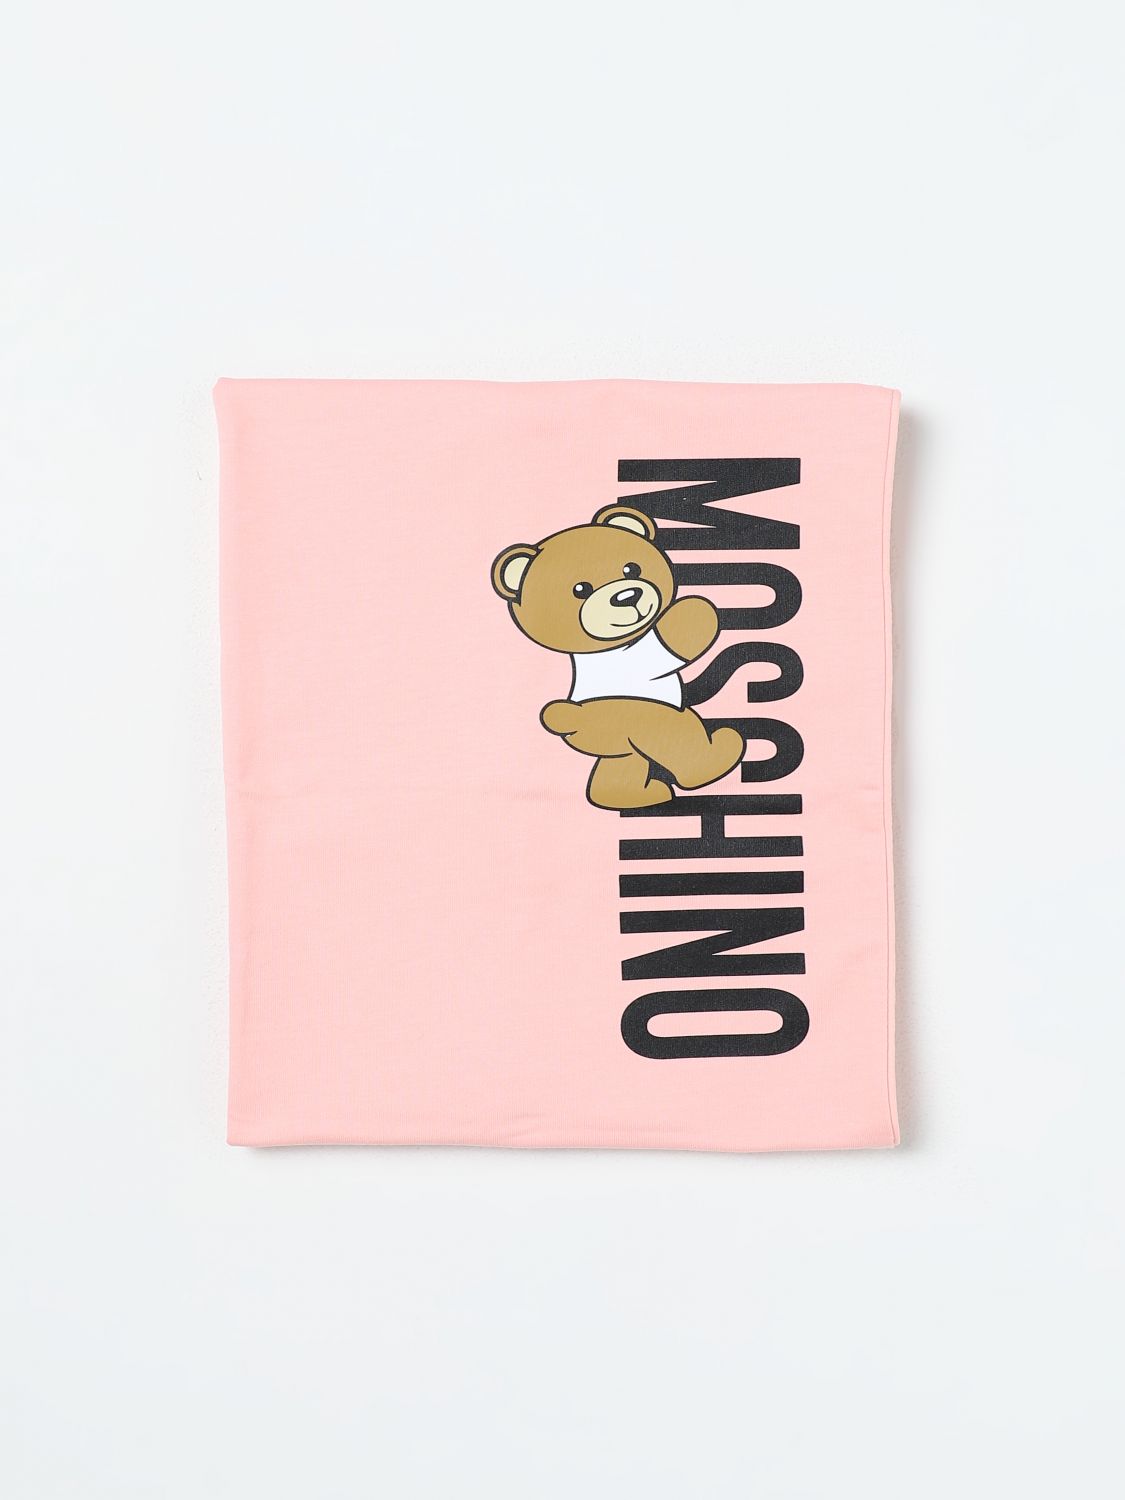 Moschino Baby Blanket  Kids Colour Pink